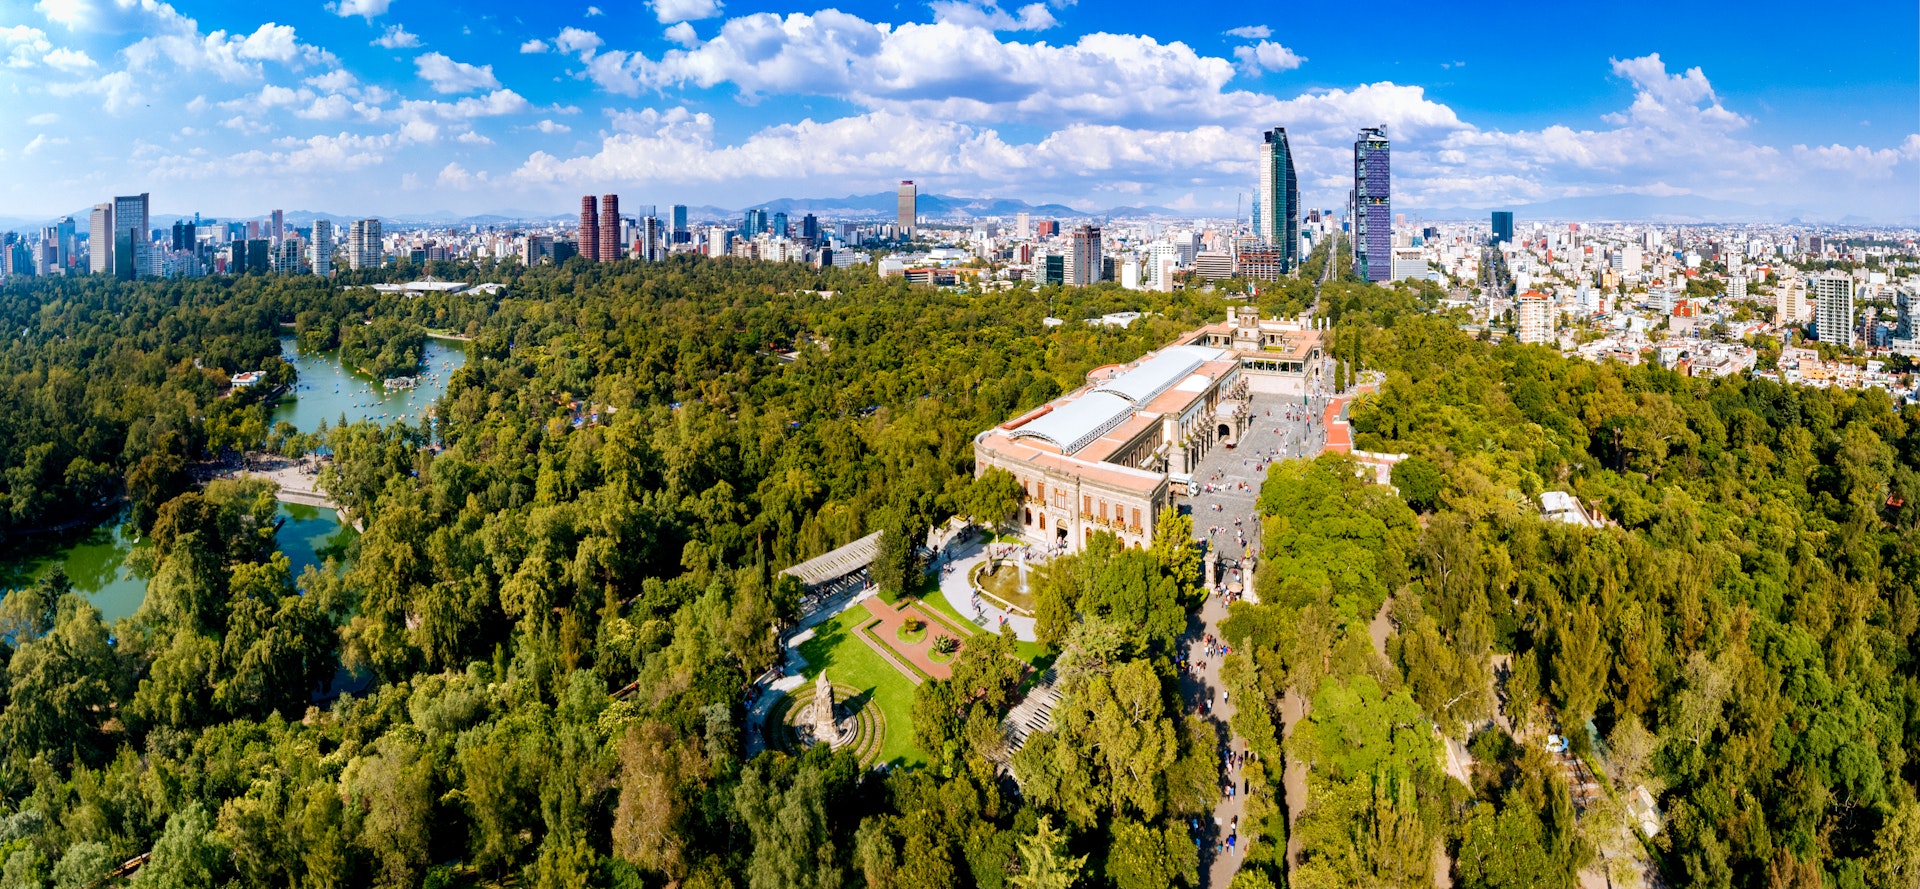 Aerial View of Mexico City skyline from Chapultepec Park